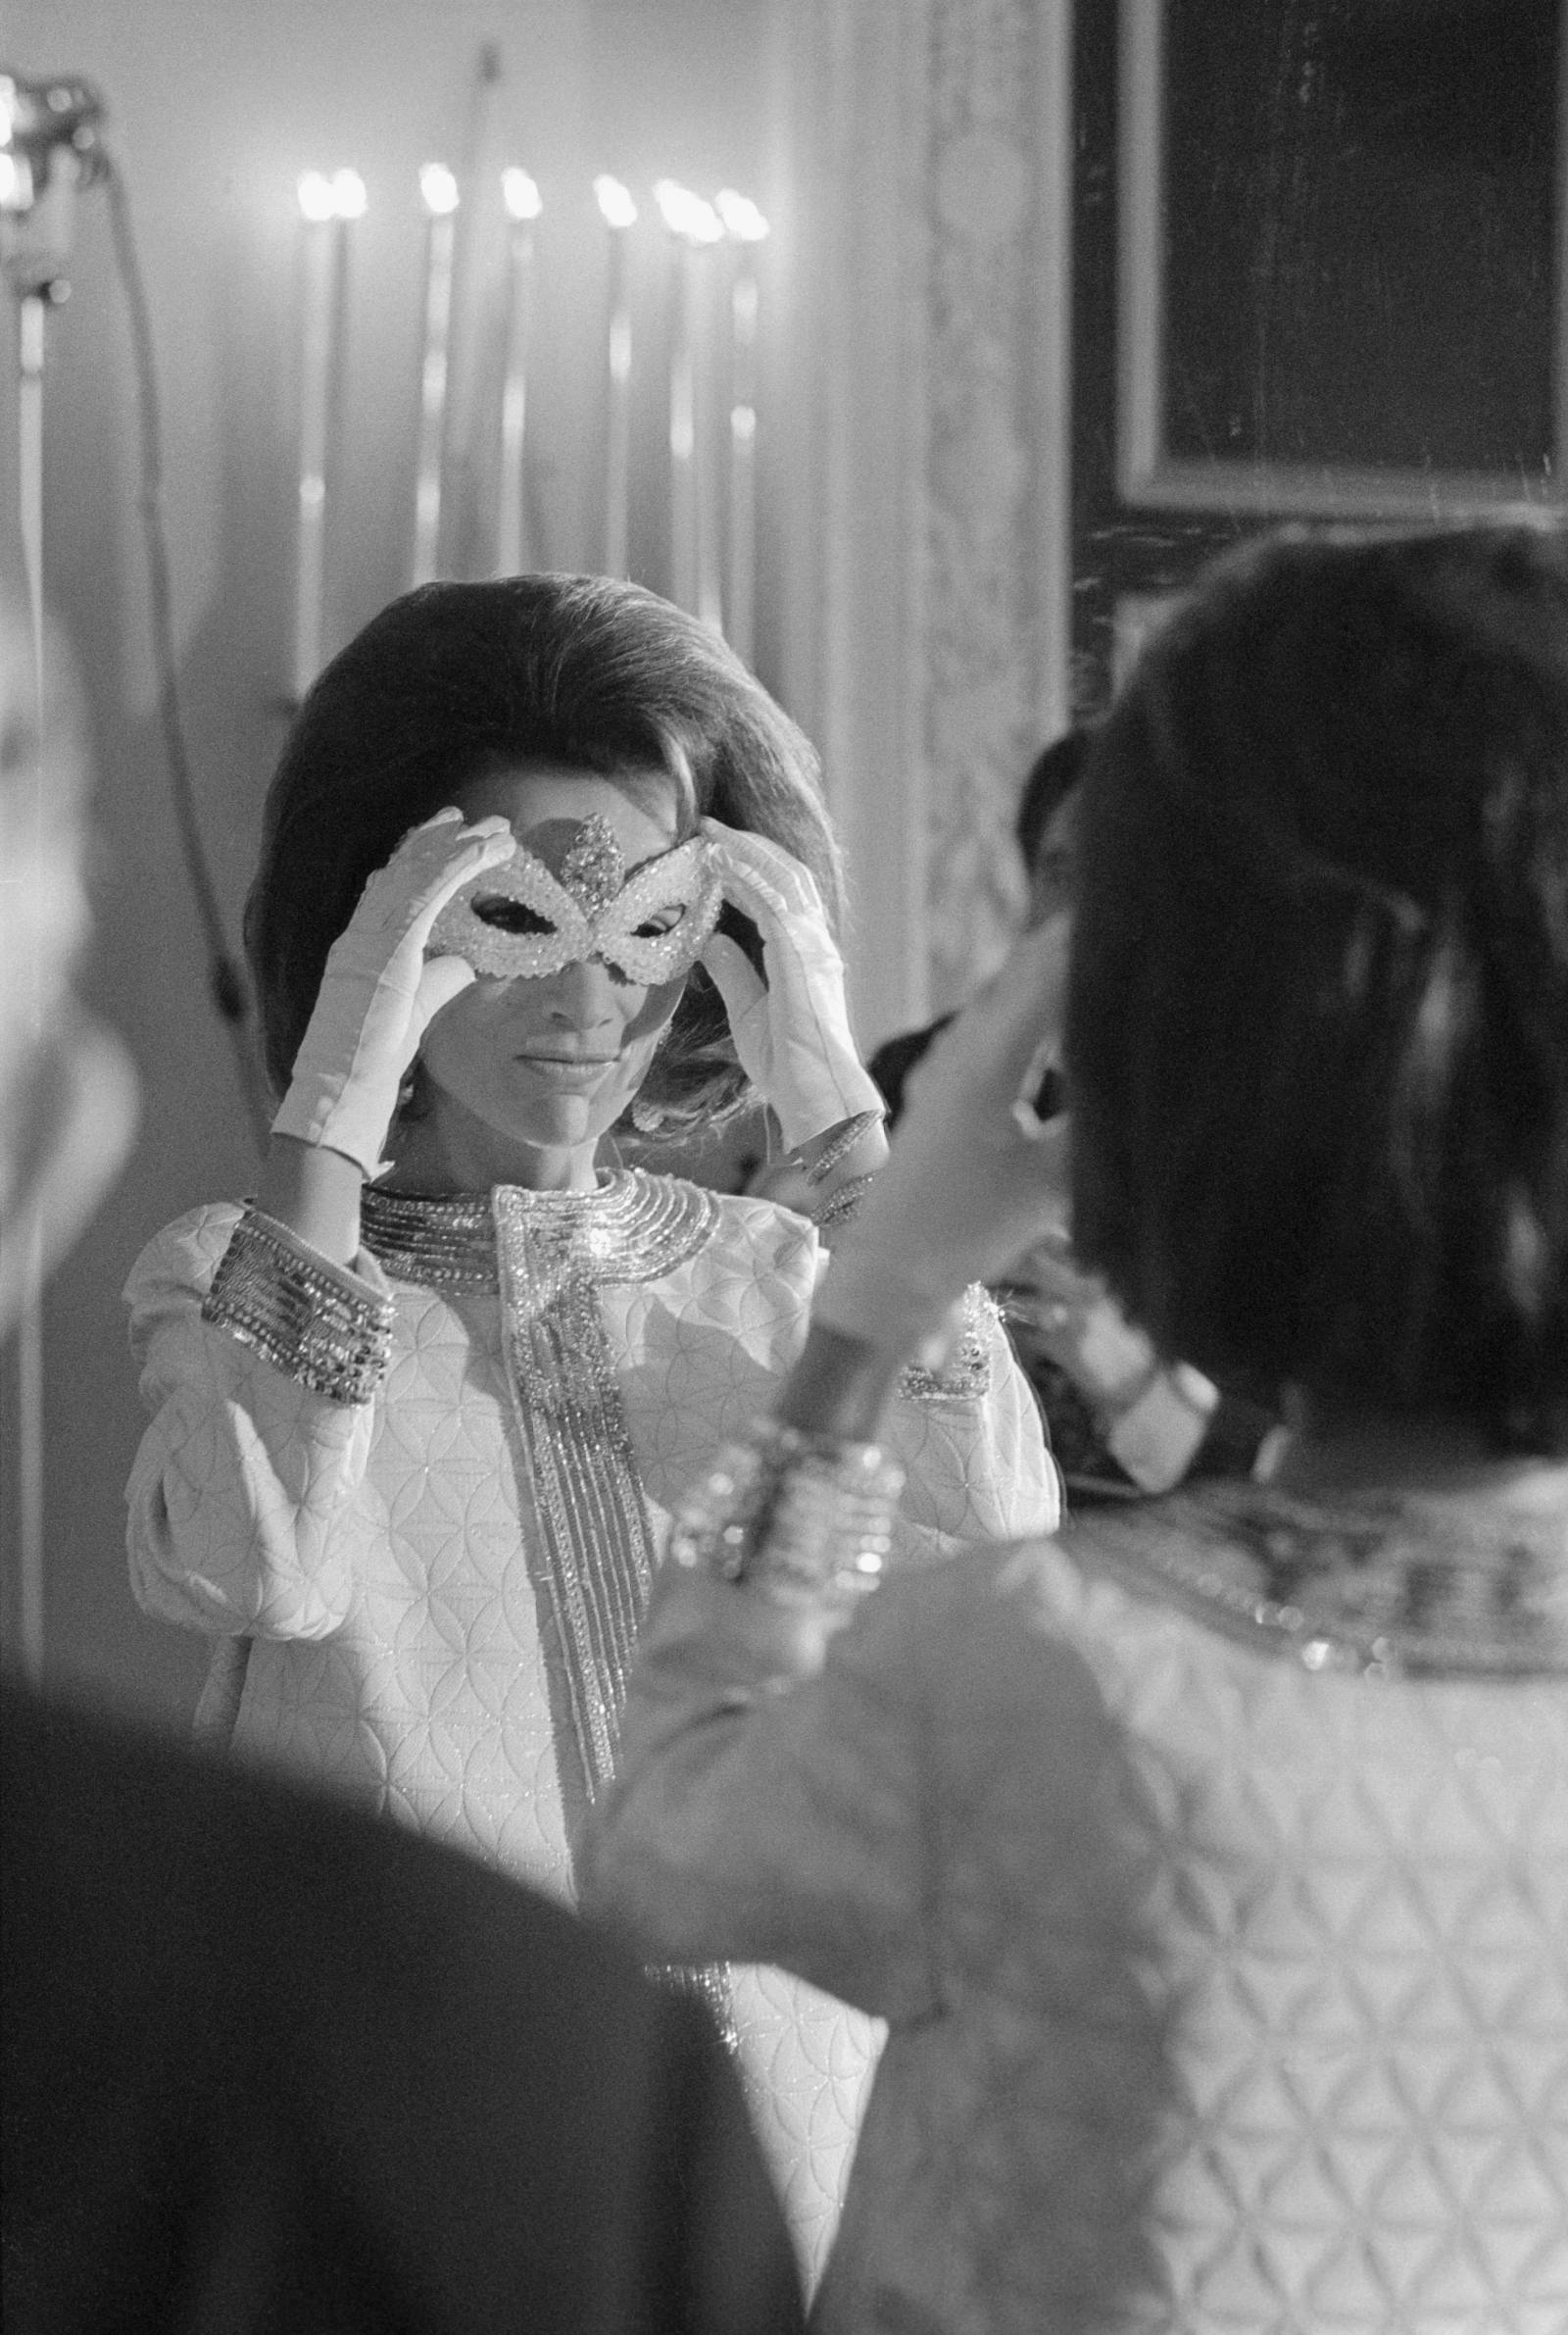 Lee Radziwill (Fot. Getty Images)